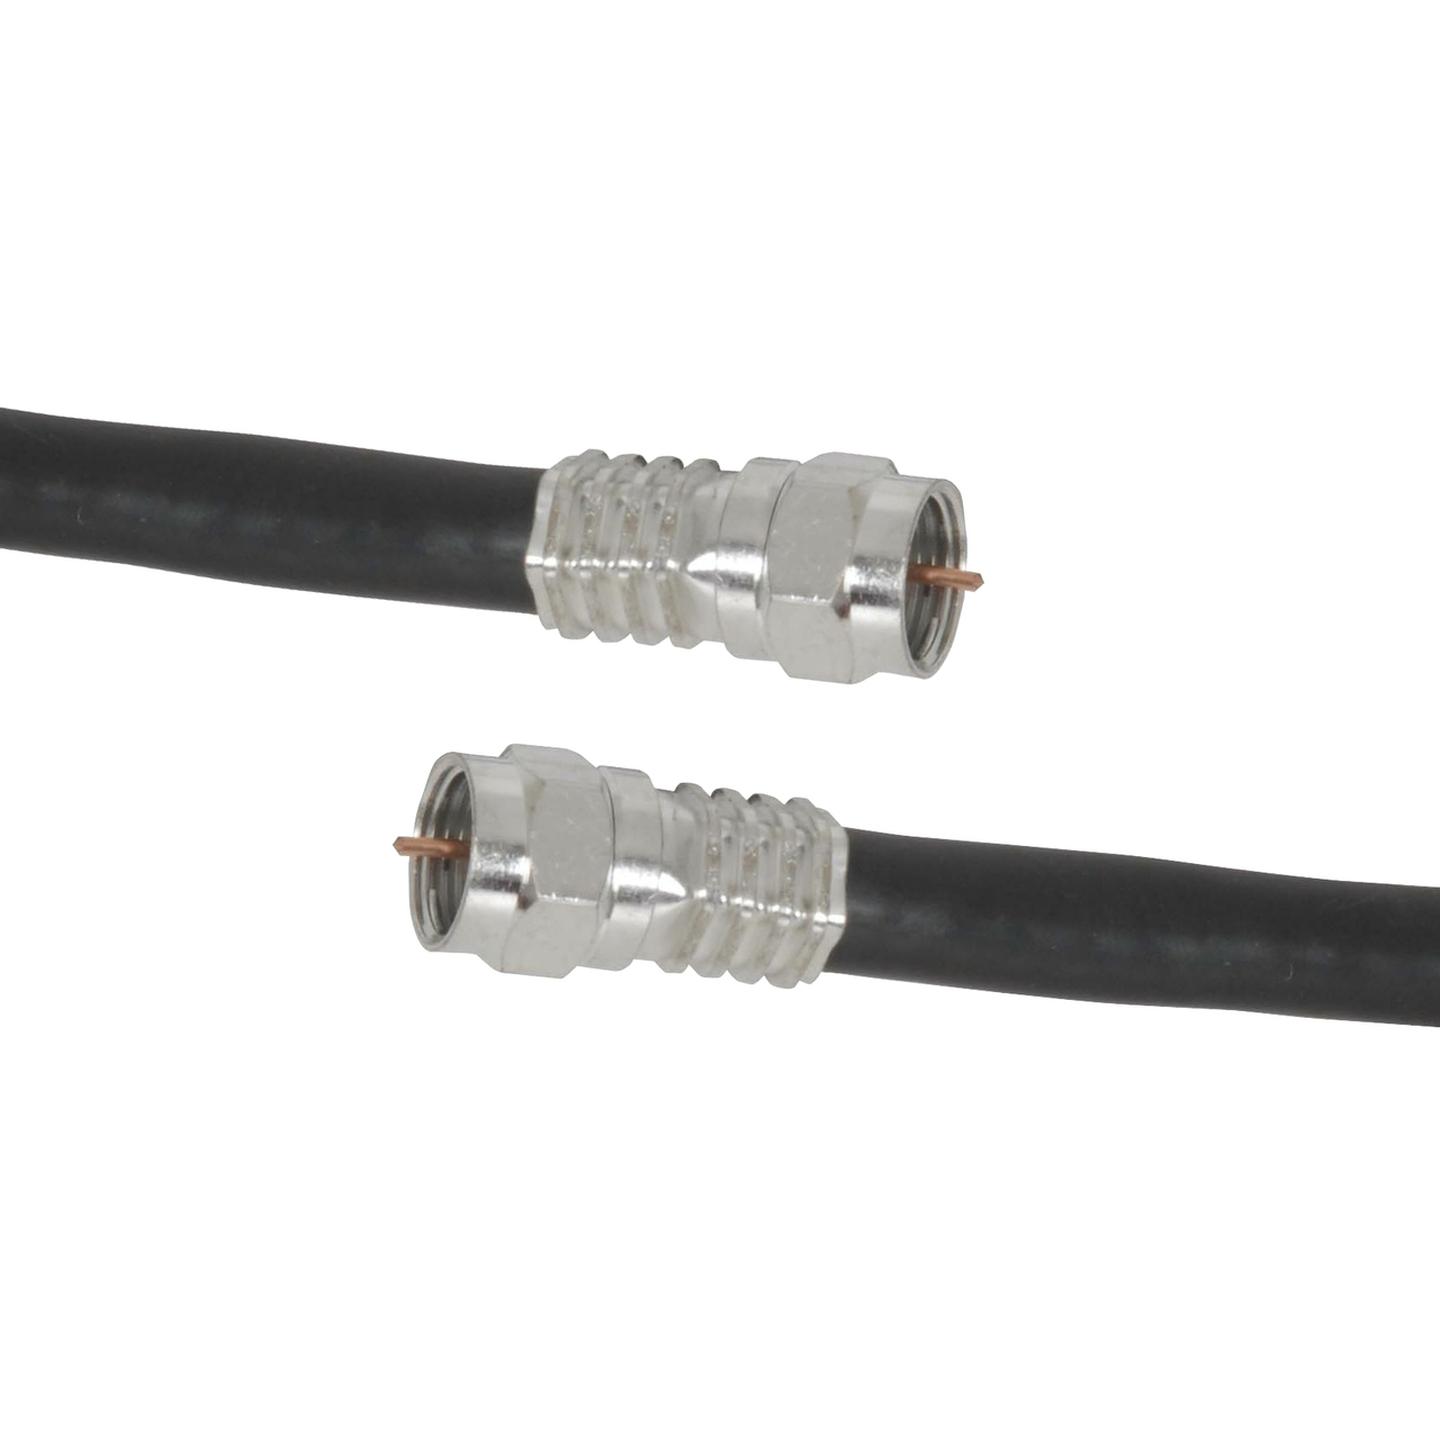 3m High Quality RG6 Quad Shield Cable with Crimped Connectors